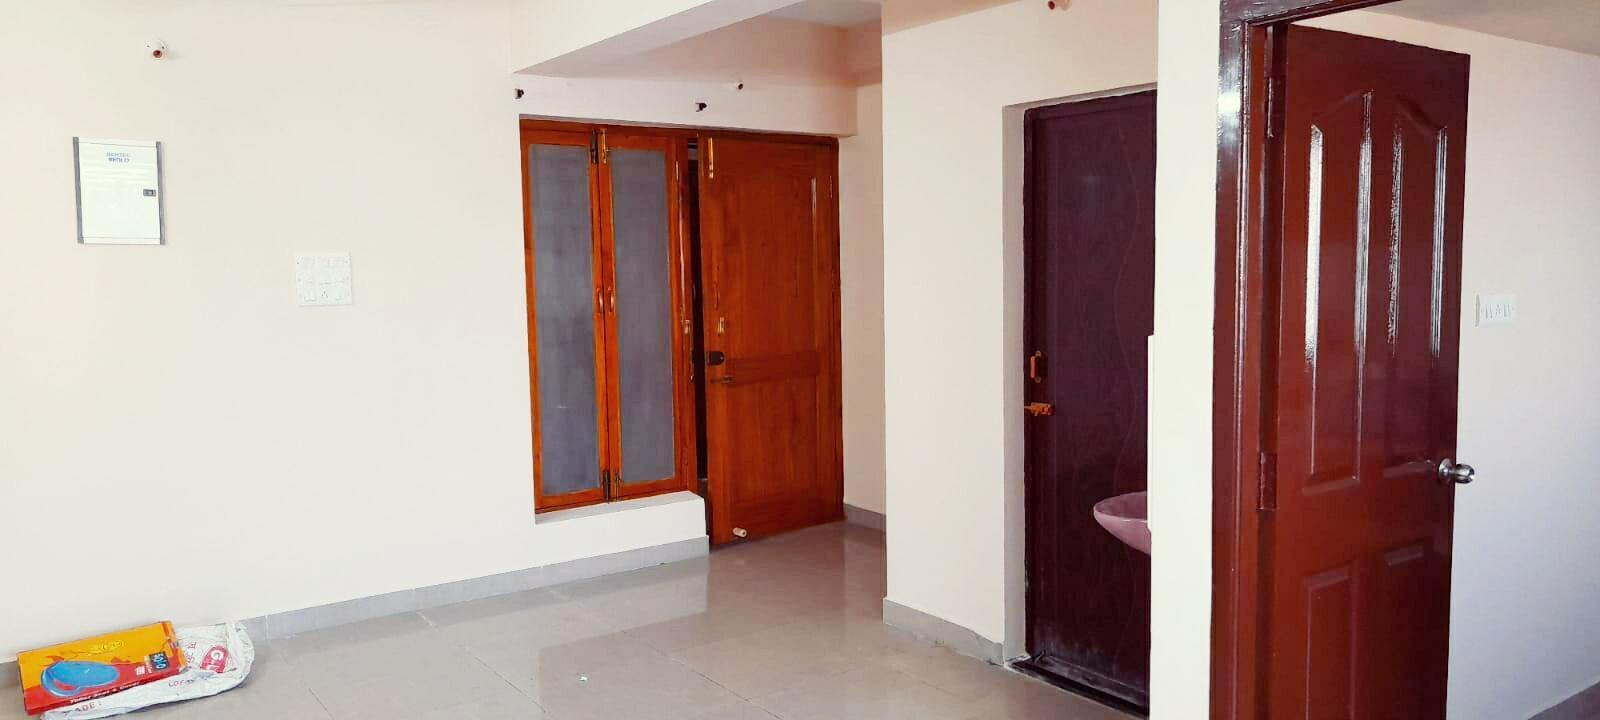 8120-for-sale-3BHK-Residential-Apartment-Rs-6500000-in-Saram-New-Saram-Puducherry